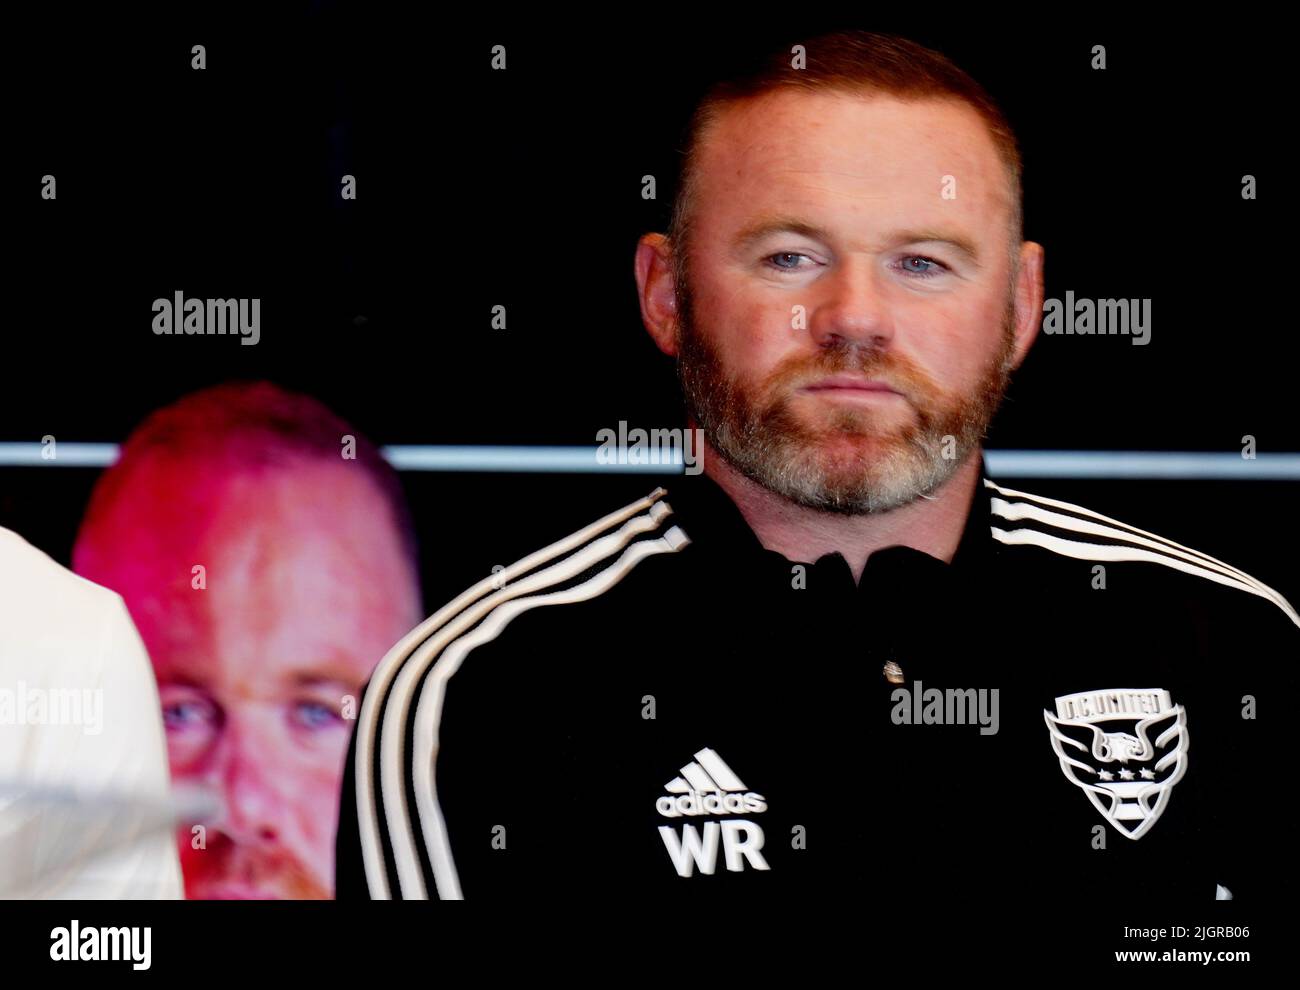 WASHINGTON, DC, USA - 12 JULY 2022: Wayne Rooney during a press conference on July 12, 2022, at Audi Field, in Washington, DC. (Photo by Tony Quinn-Alamy Live News) Stock Photo